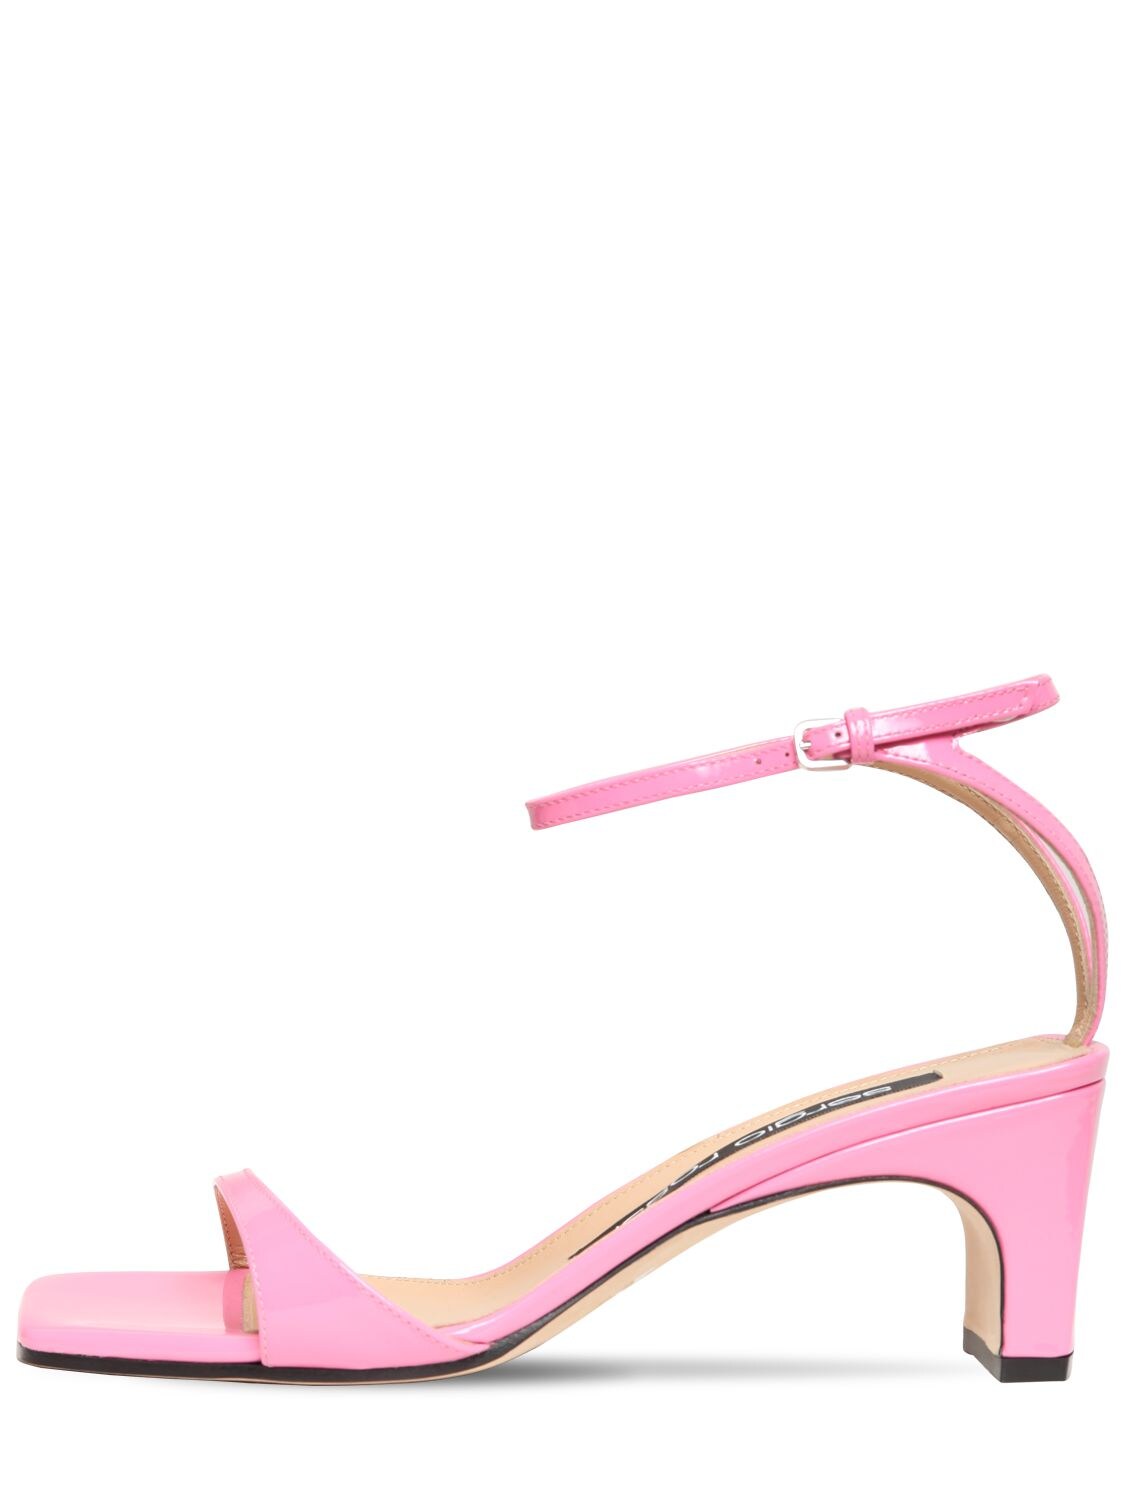 Sergio Rossi 60mm Patent Leather Sandals In Pink